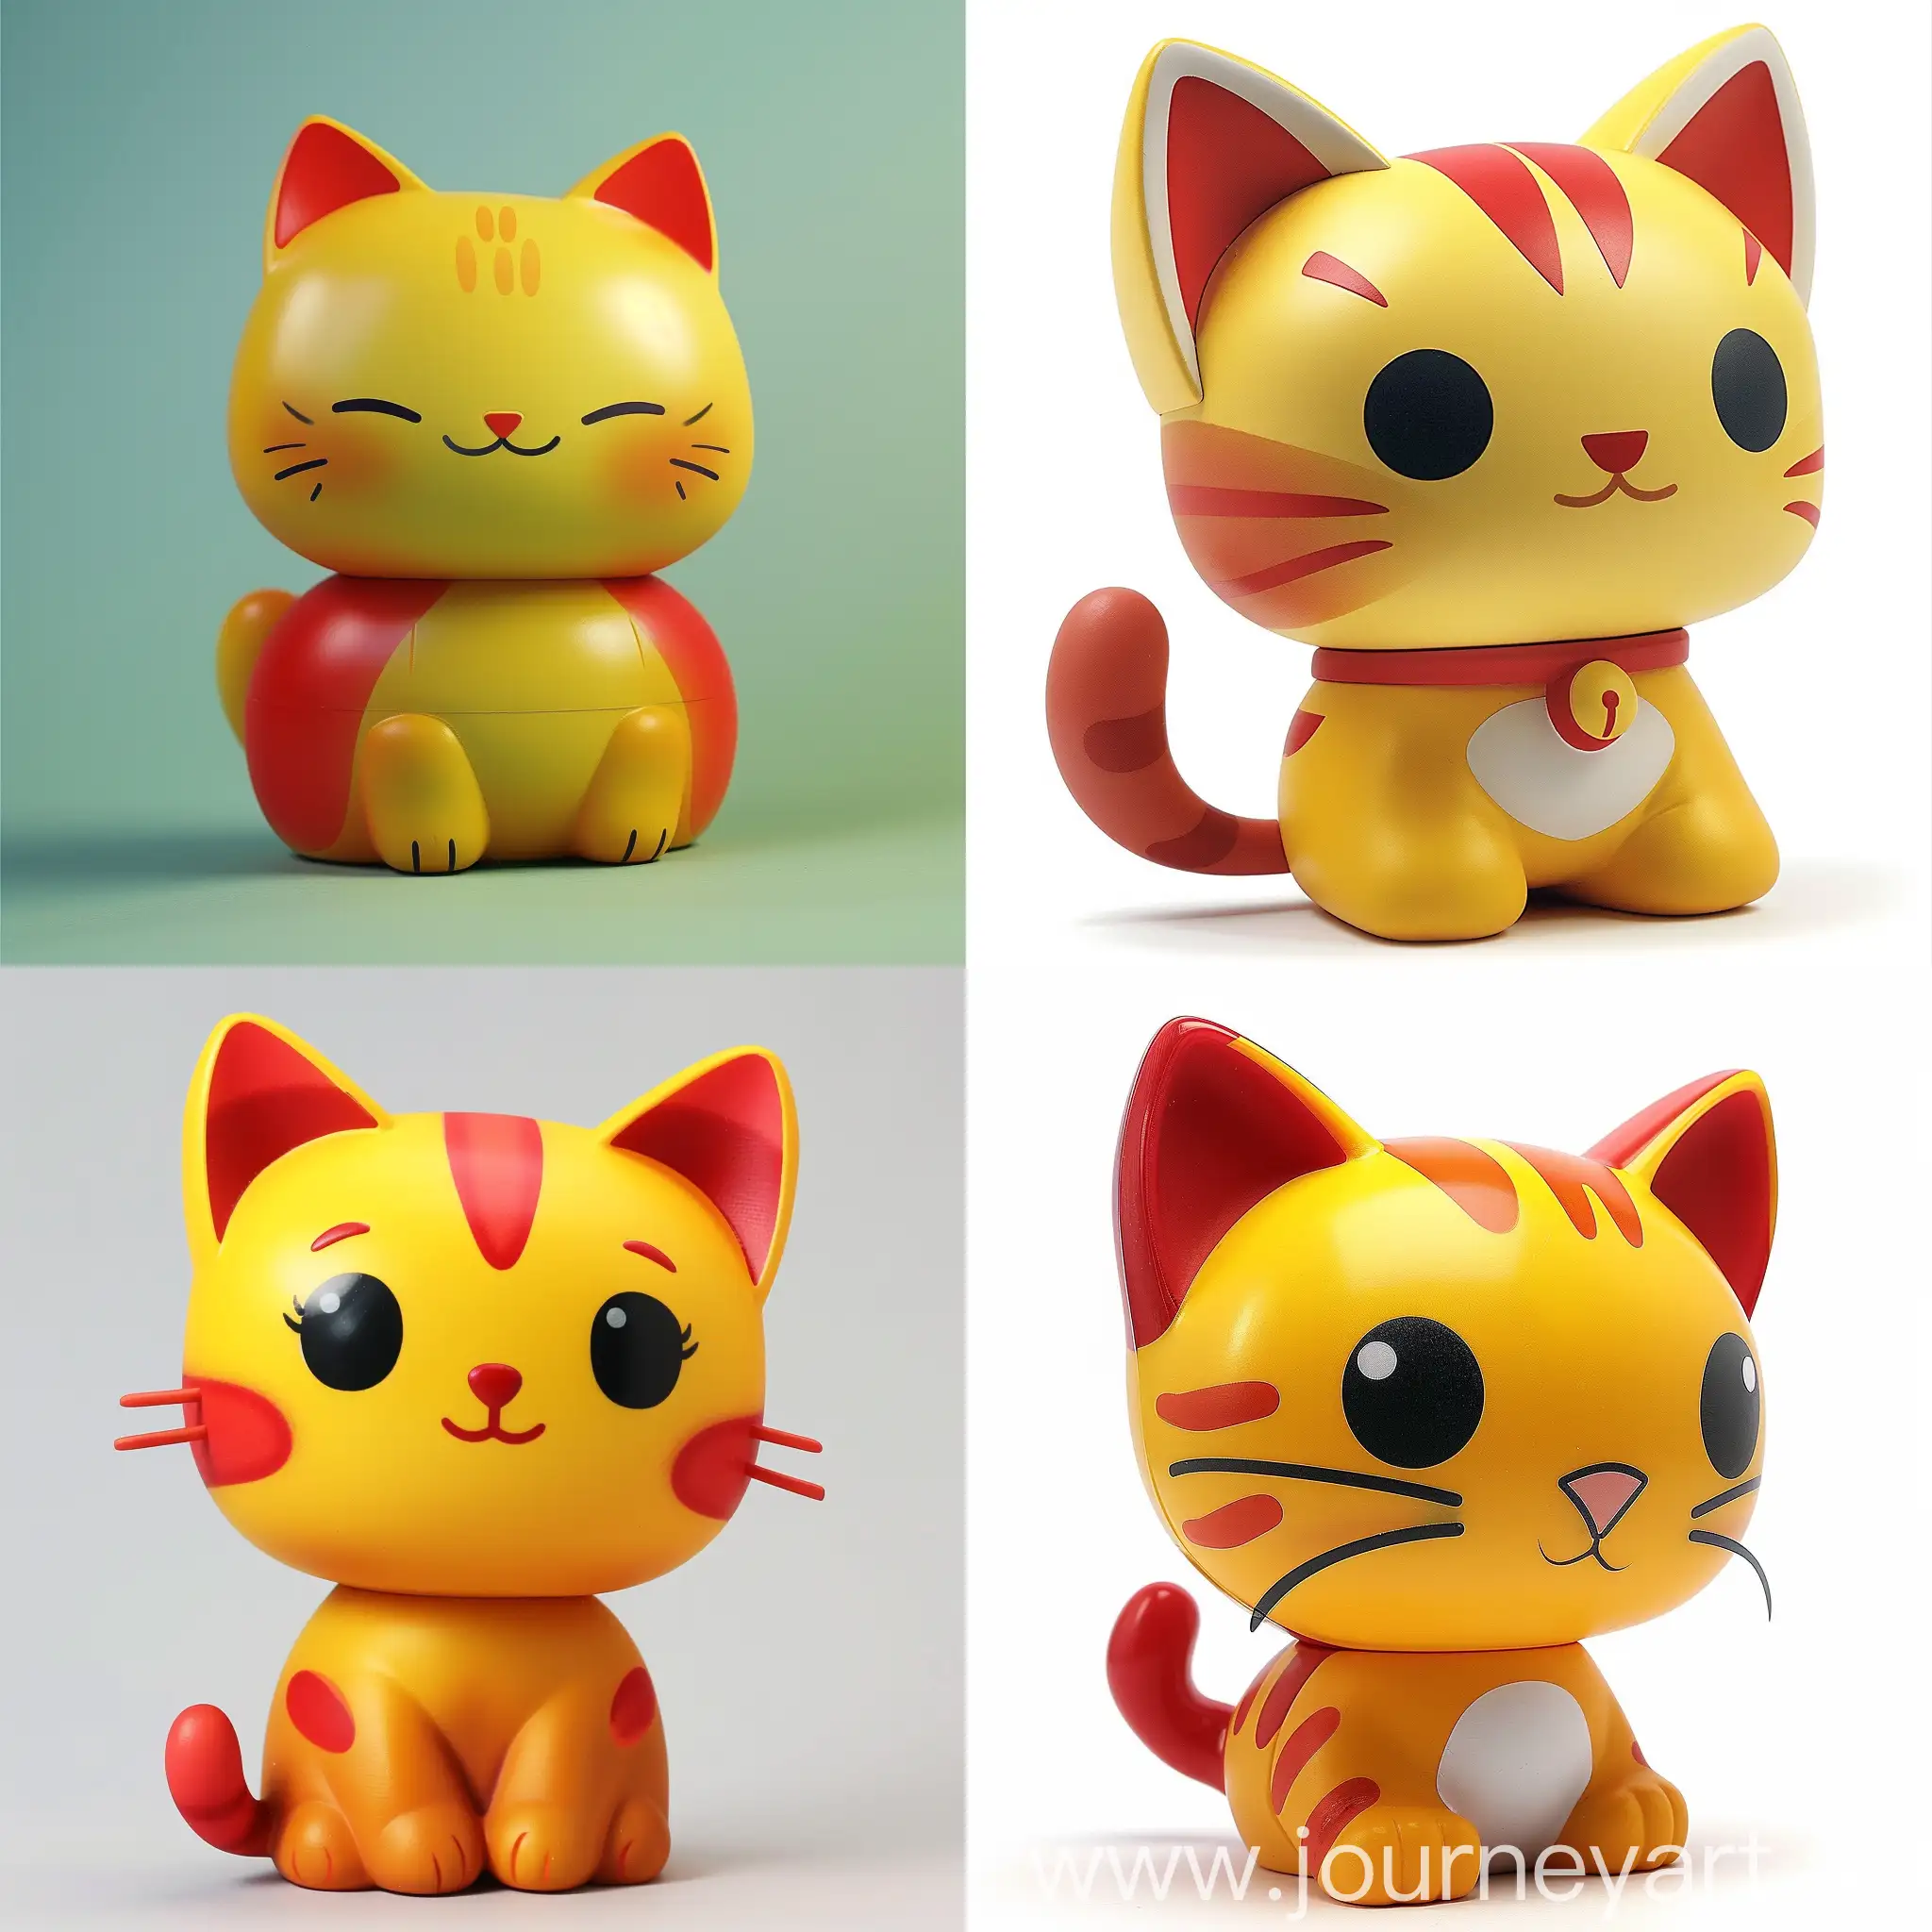 a designer vinyl toy of a cute yellow and red cat